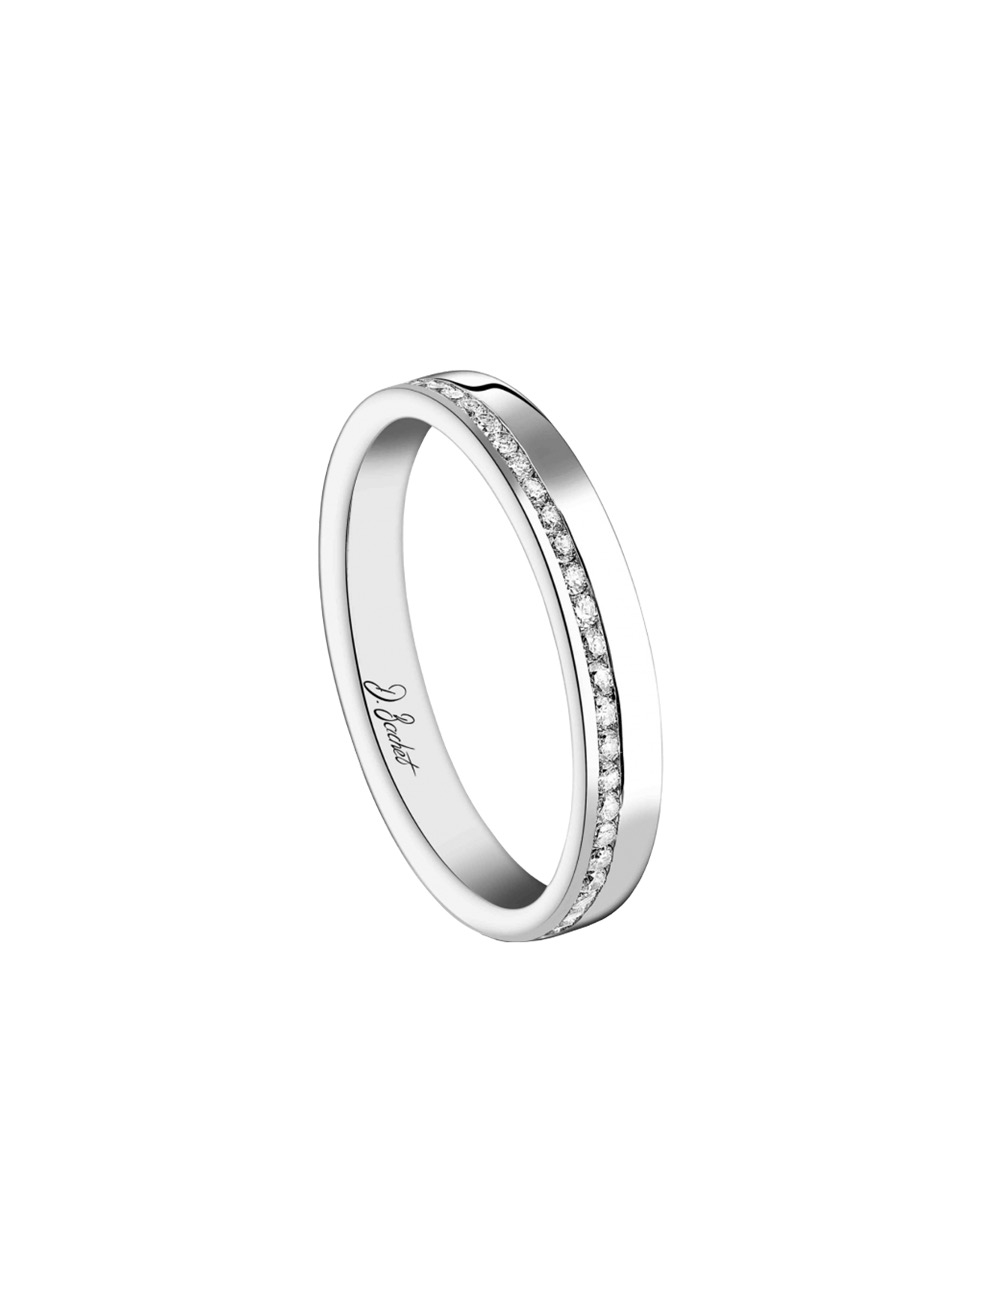 A wedding ring for women, refined and delicate in platinum and white diamonds